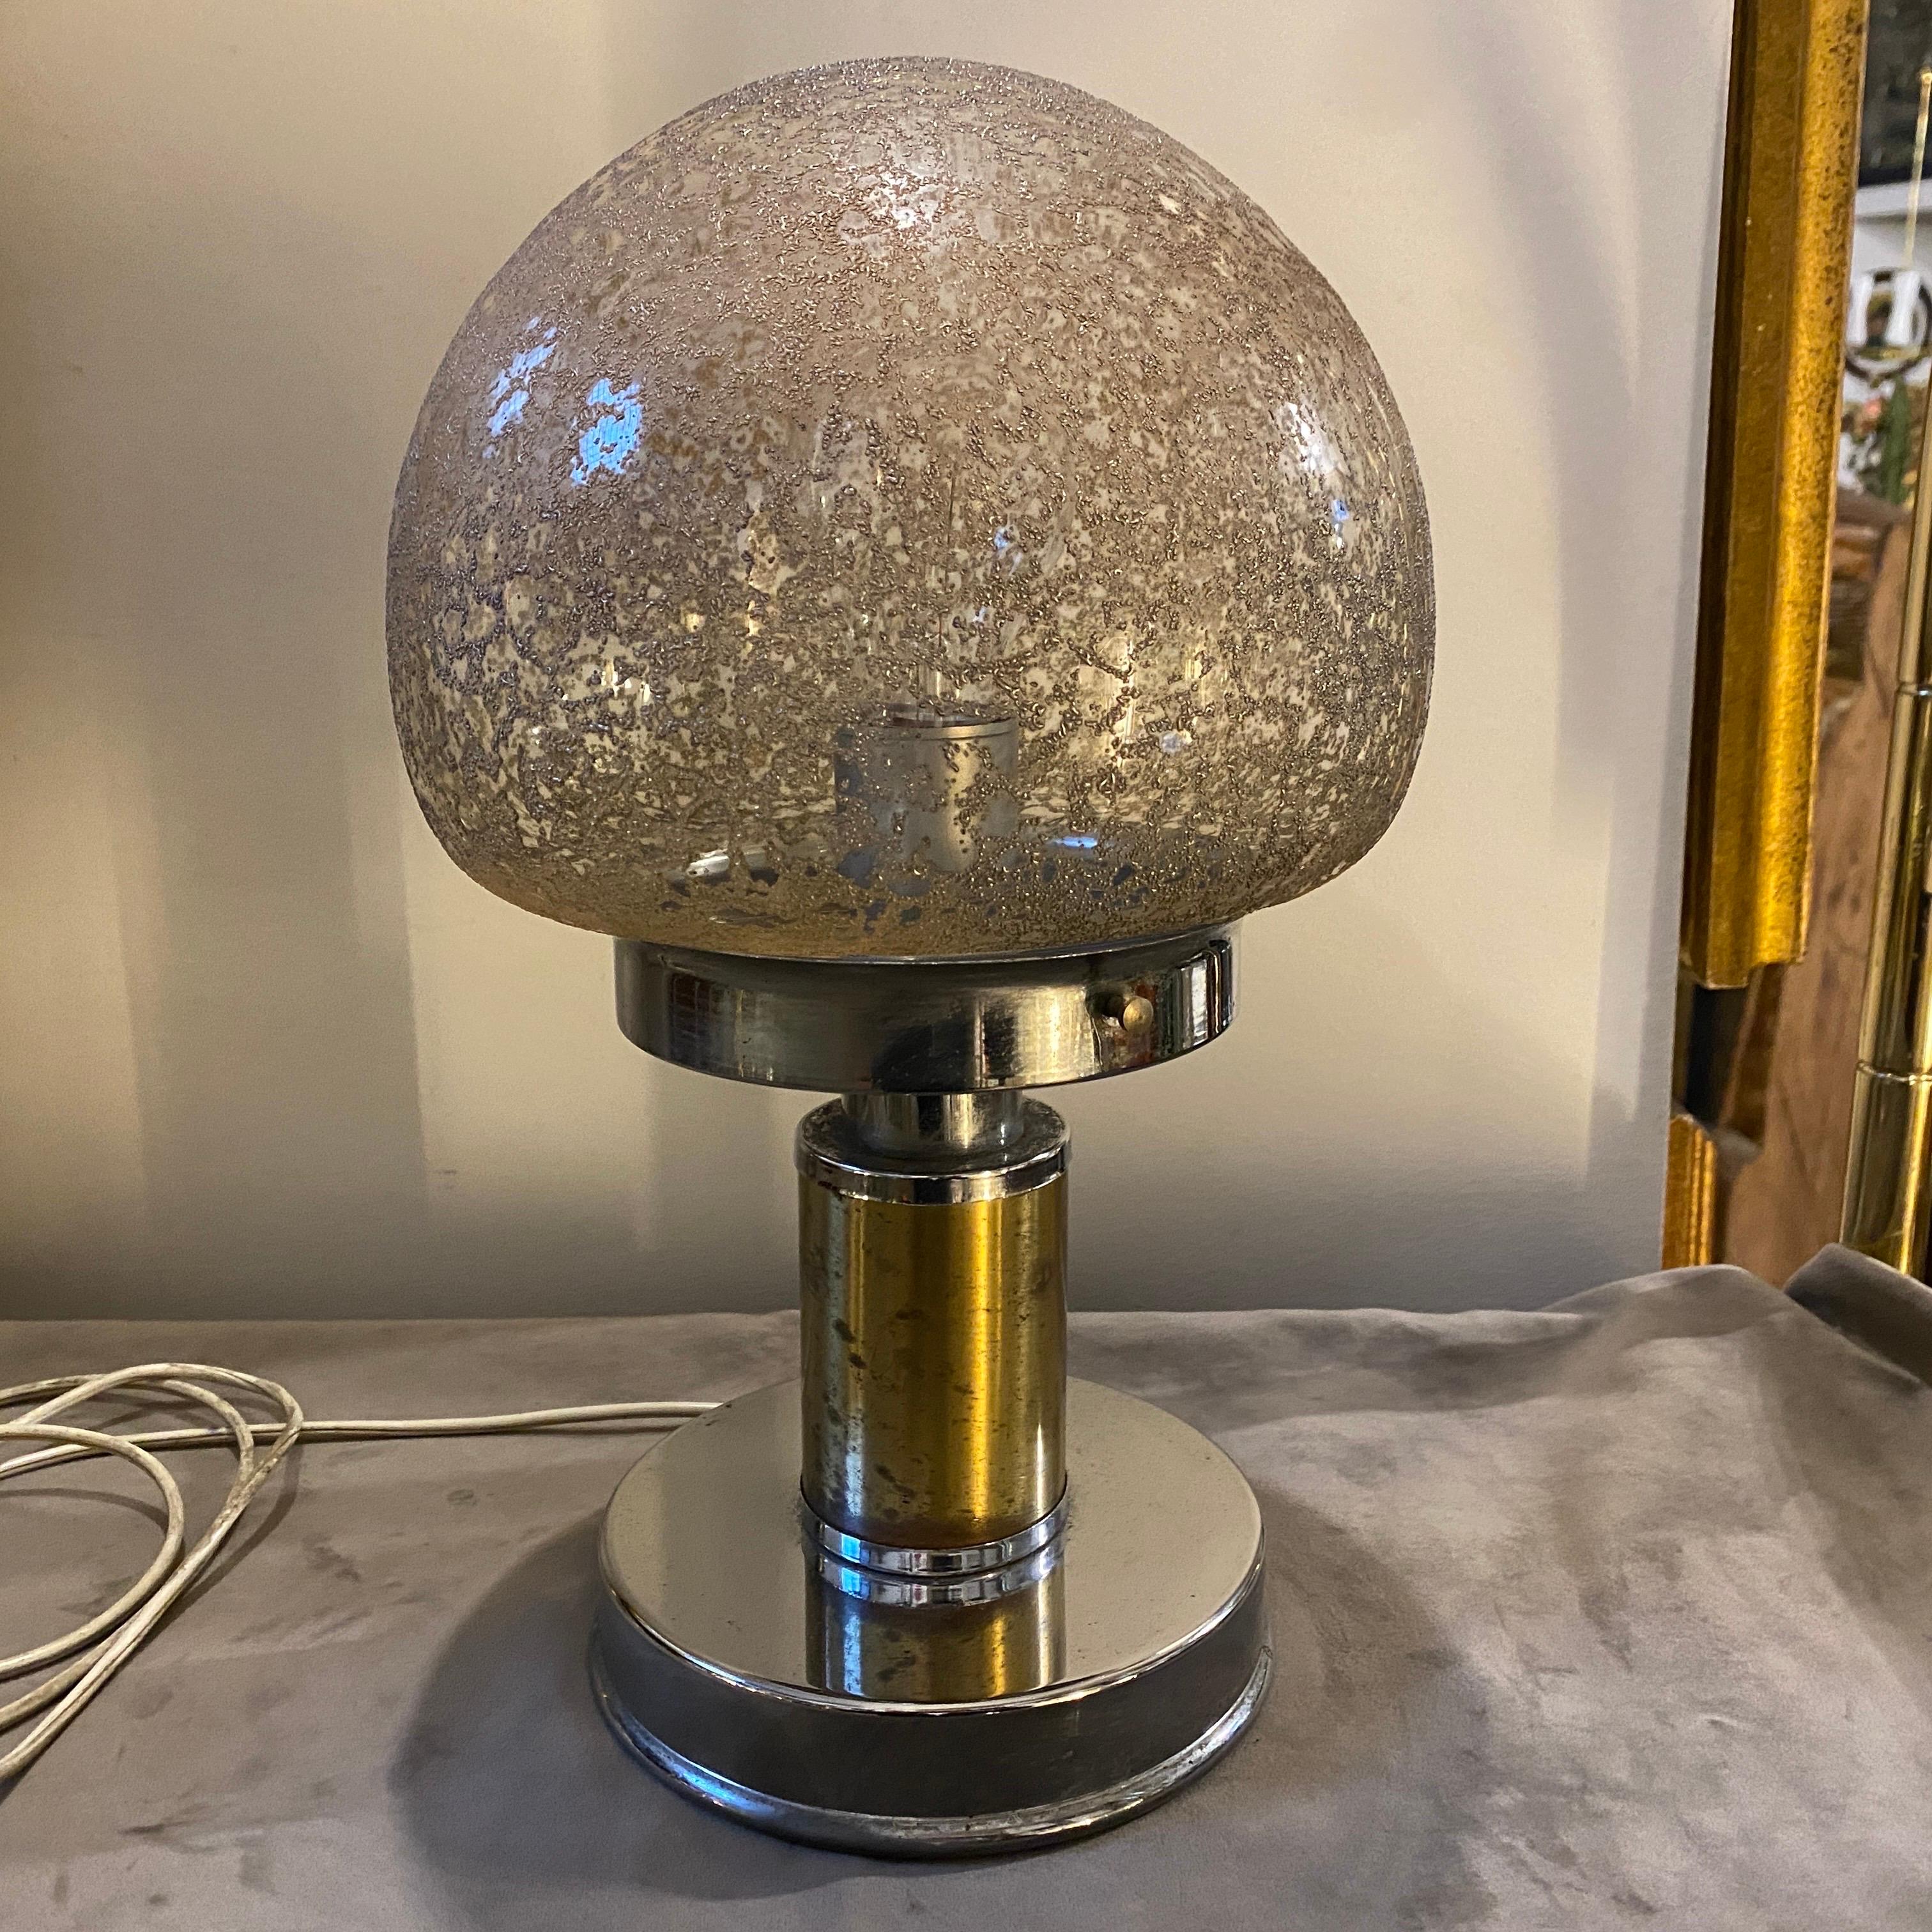 A chromed metal, brass and brown glass table lamp designed and manufactured in Italy in the Space Age era. It's in working order and in lovely conditions, it needs a regular e27 bulb and works both 110-240 volts. The lamp exudes a striking